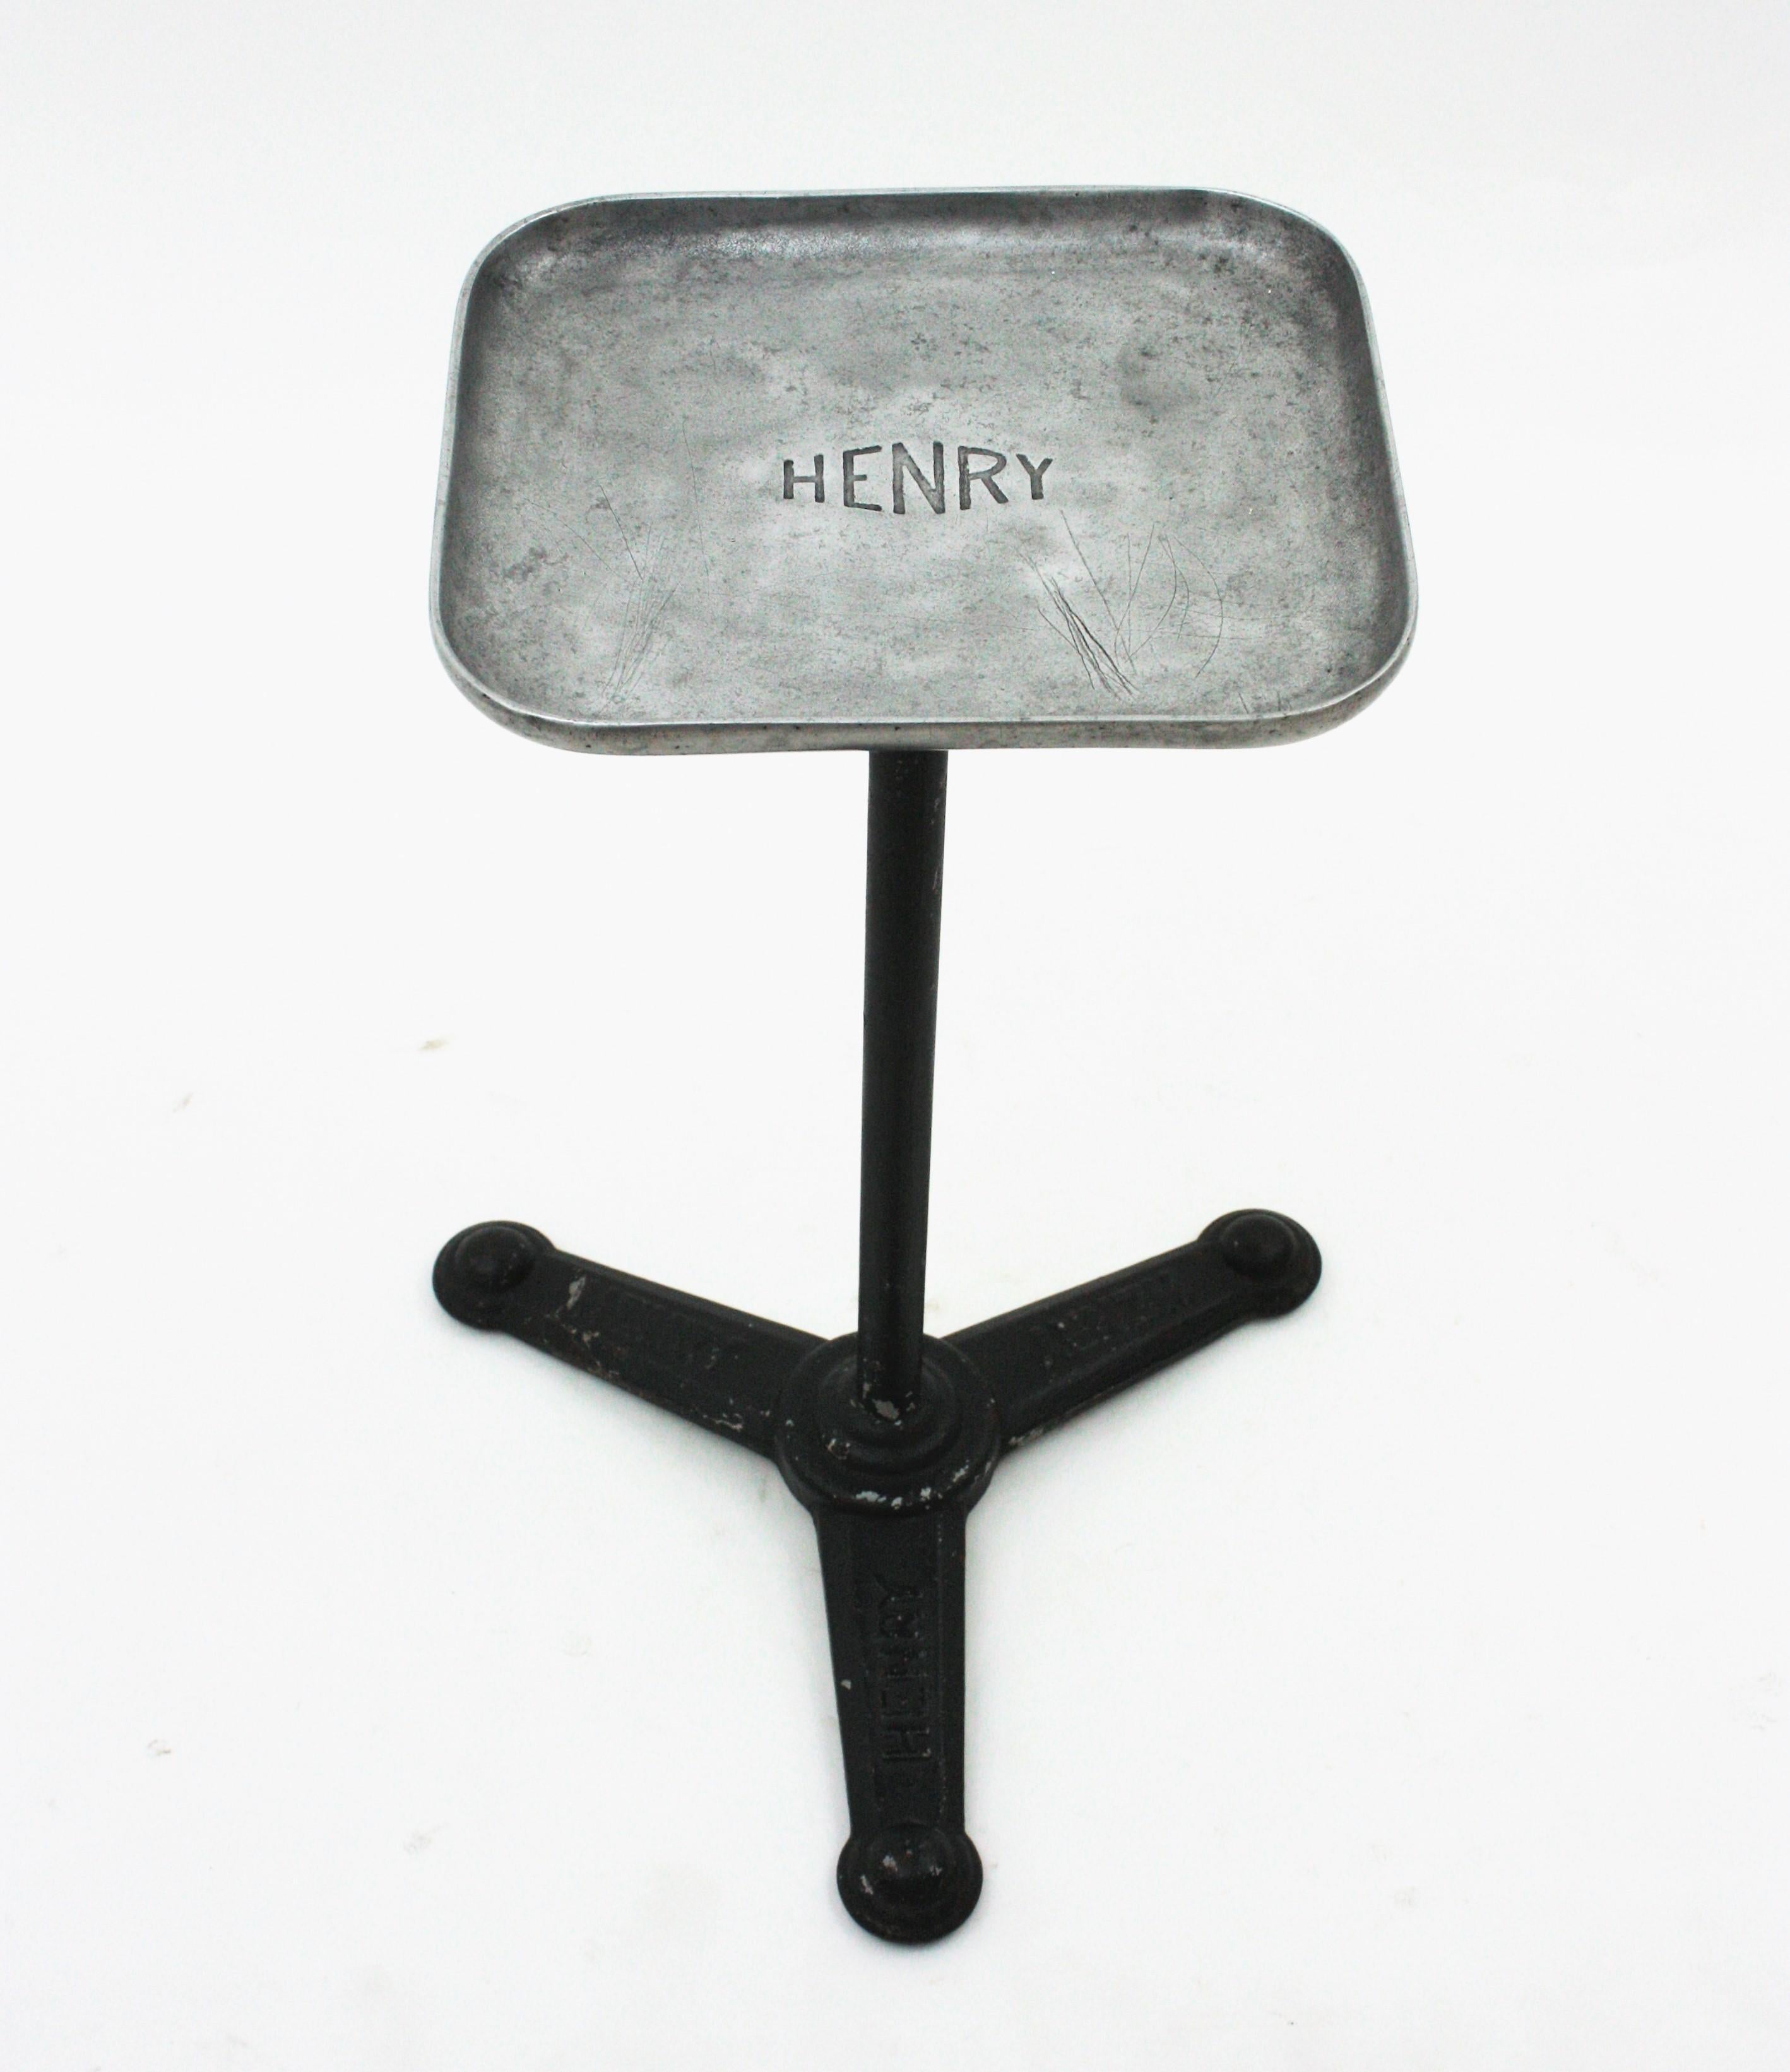 Aluminium and iron spanish drinks table, 1960s
Rectangular aluminium top with black painted iron tripod base.
Originally used as hairdresser work stand tripod table by Henry Colomer beauty salon and hairdressing supplier.
This eye-catching